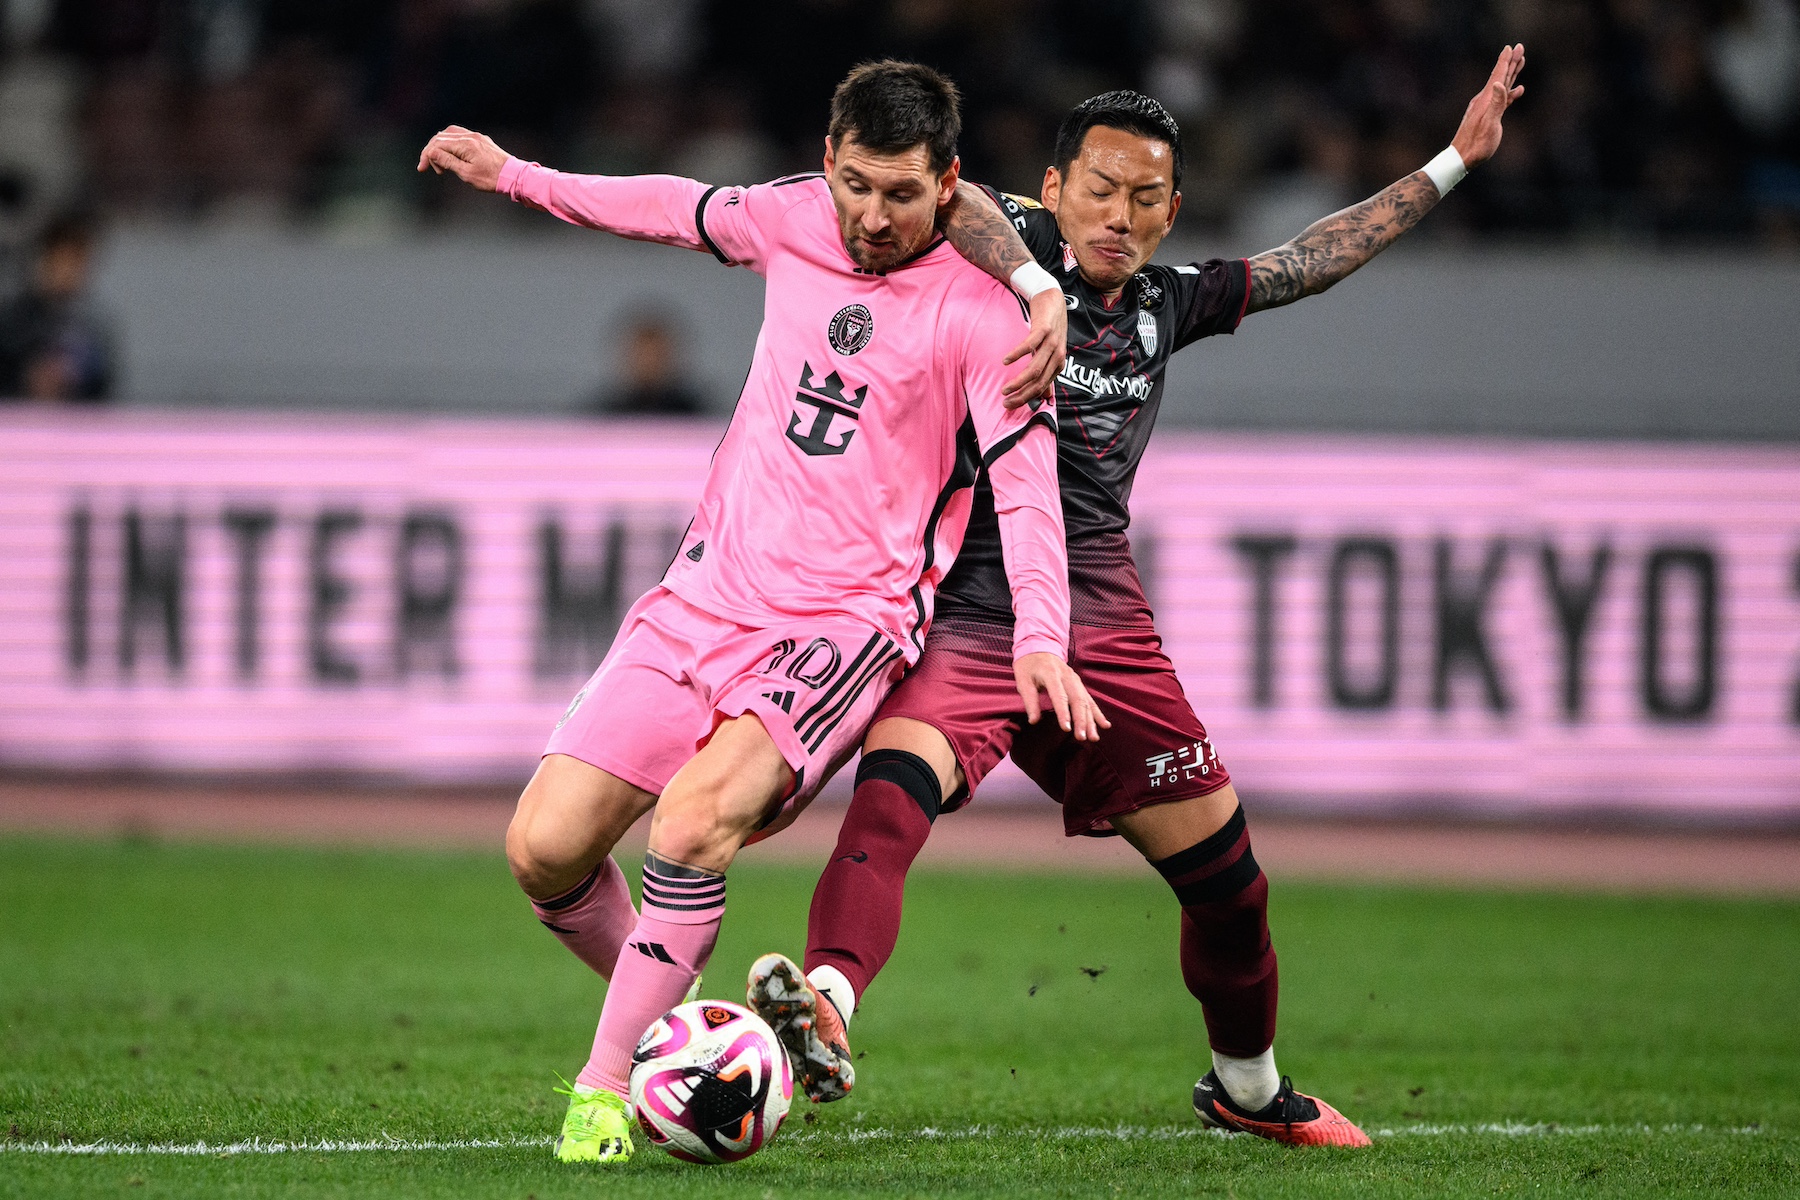 Argentine Soccer Star Lionel Messi Sat Out At A Friendly Football Match In Hong Kong And Ctaused a Huge Controversy